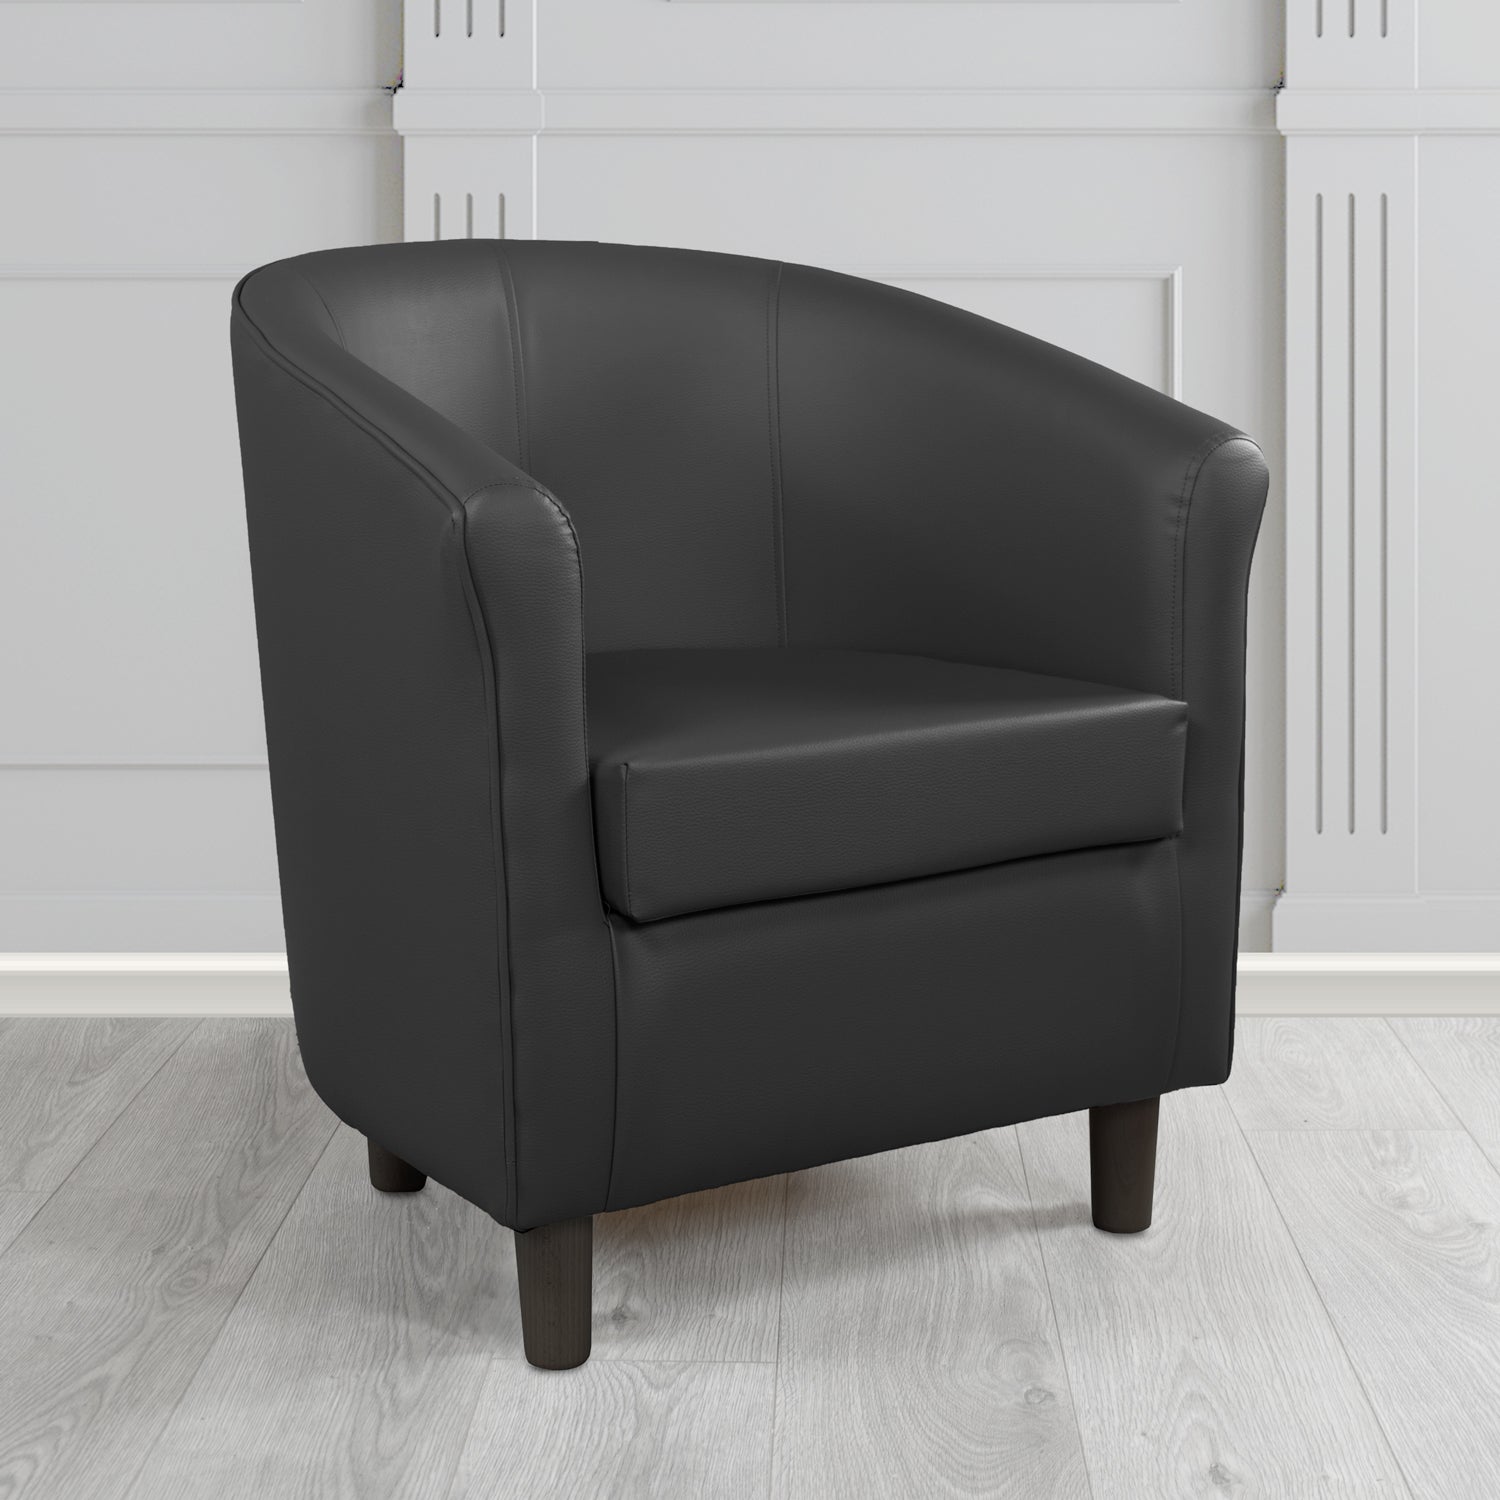 Tuscany Tub Chair in Madrid Black Faux Leather - The Tub Chair Shop